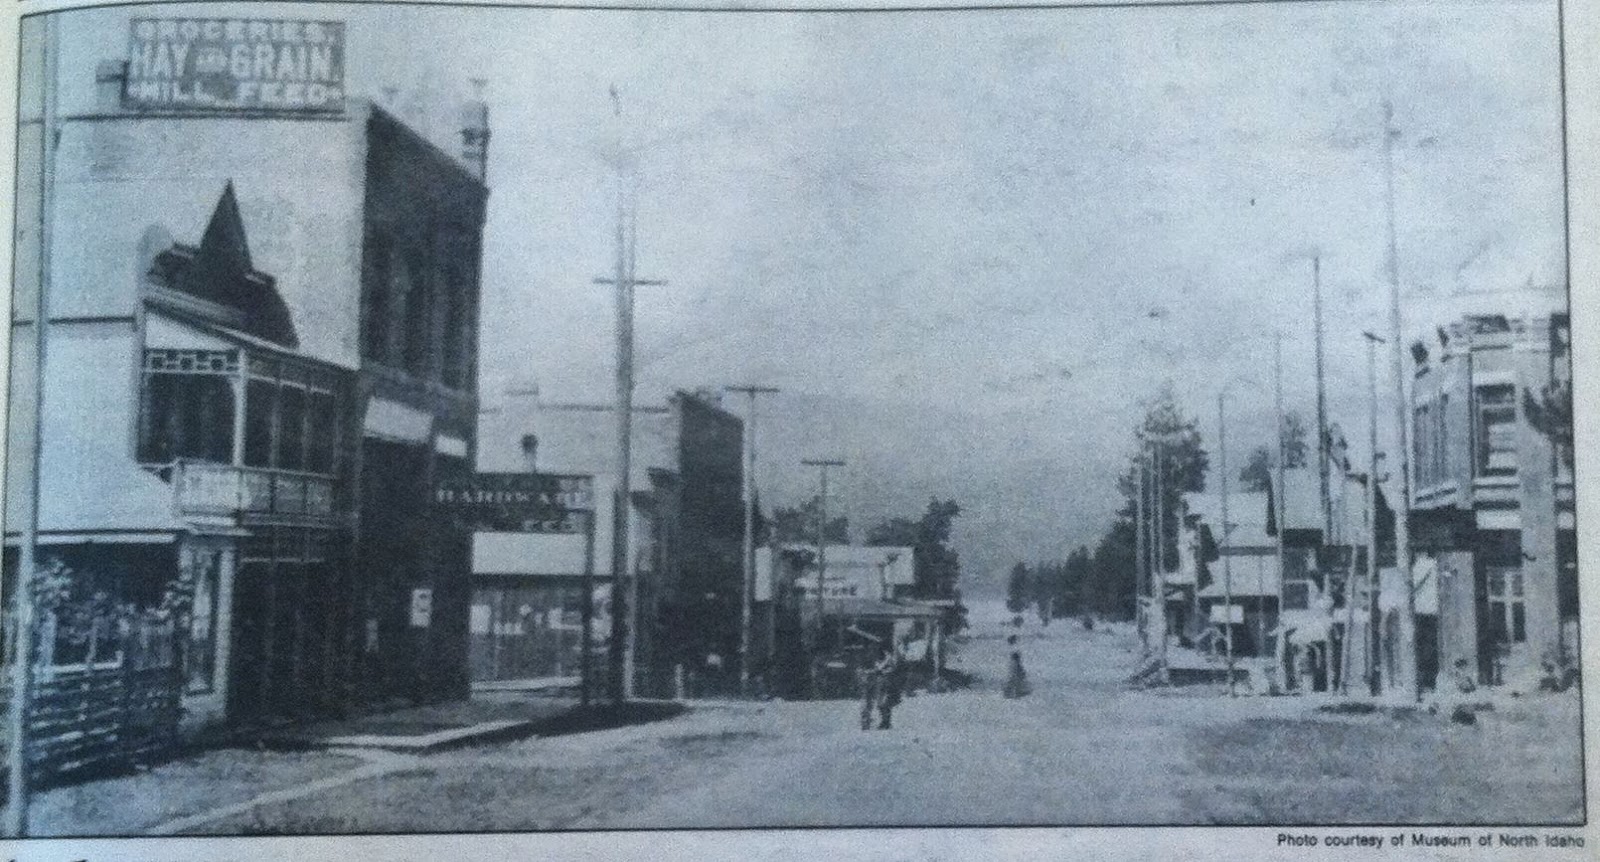 Old Downtown Coeur d'Alene